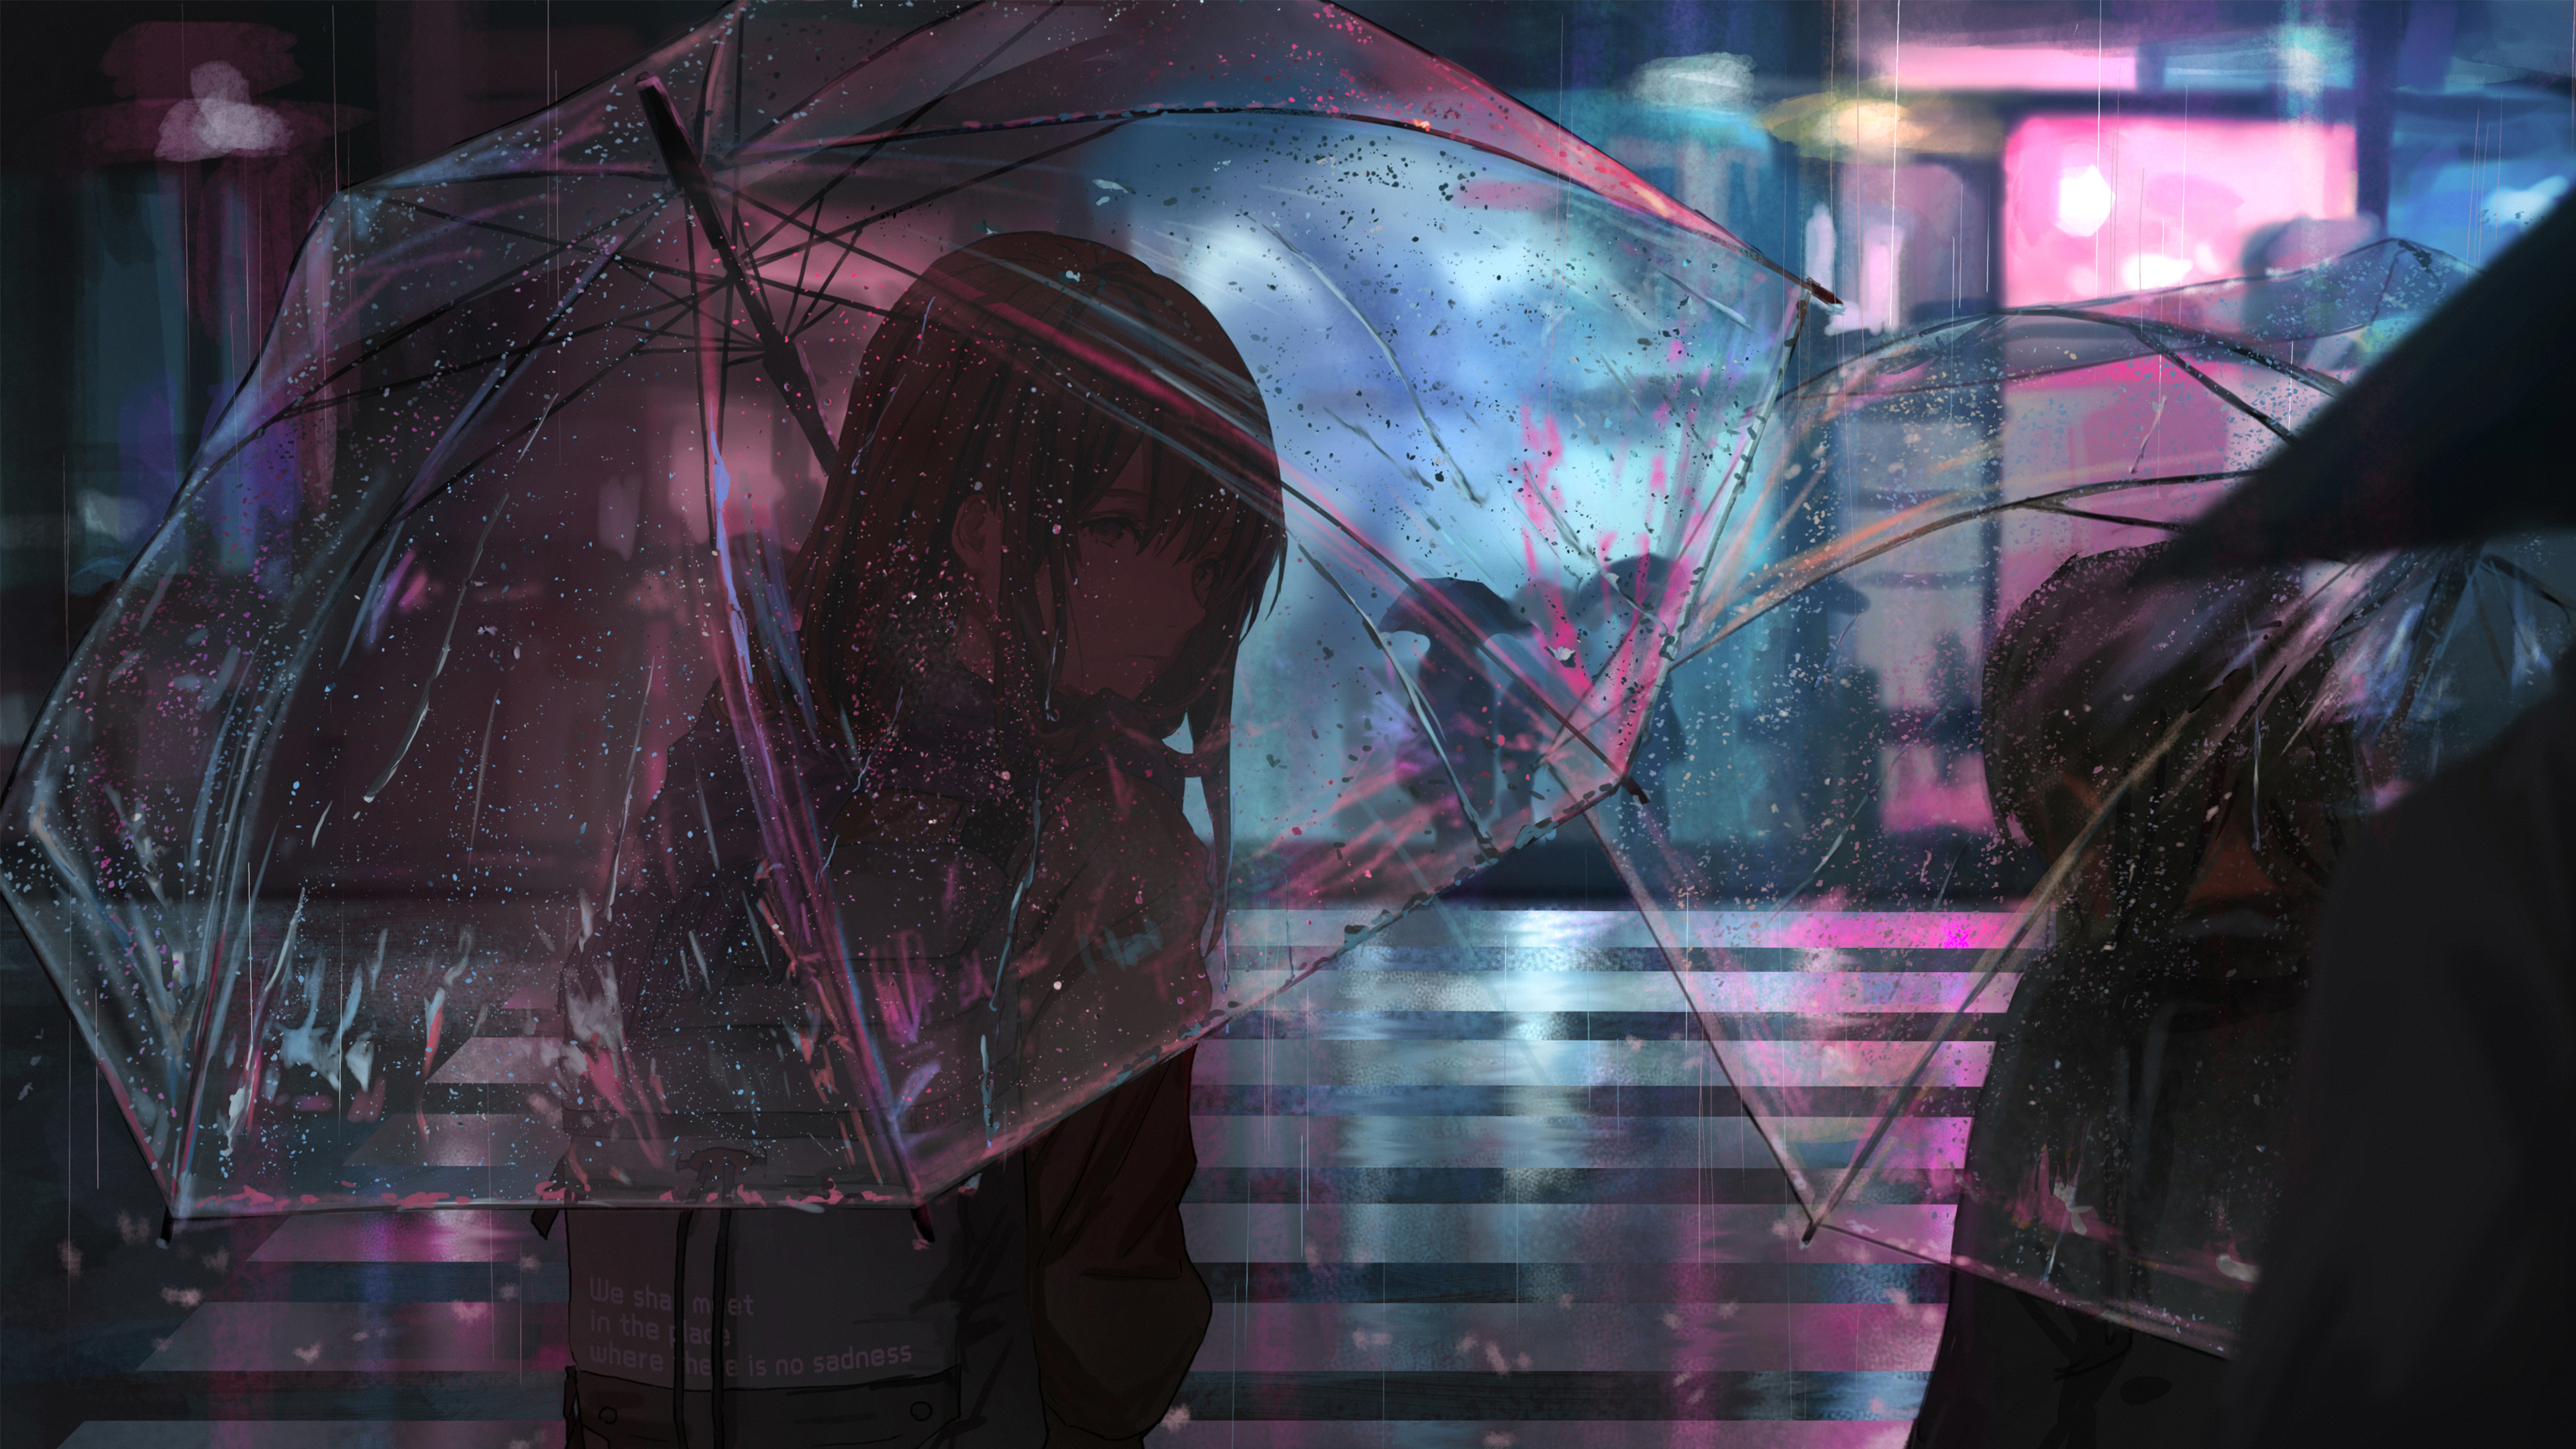 Anime Girl In Rain With Umbrella 4k, HD Anime, 4k Wallpapers, Images